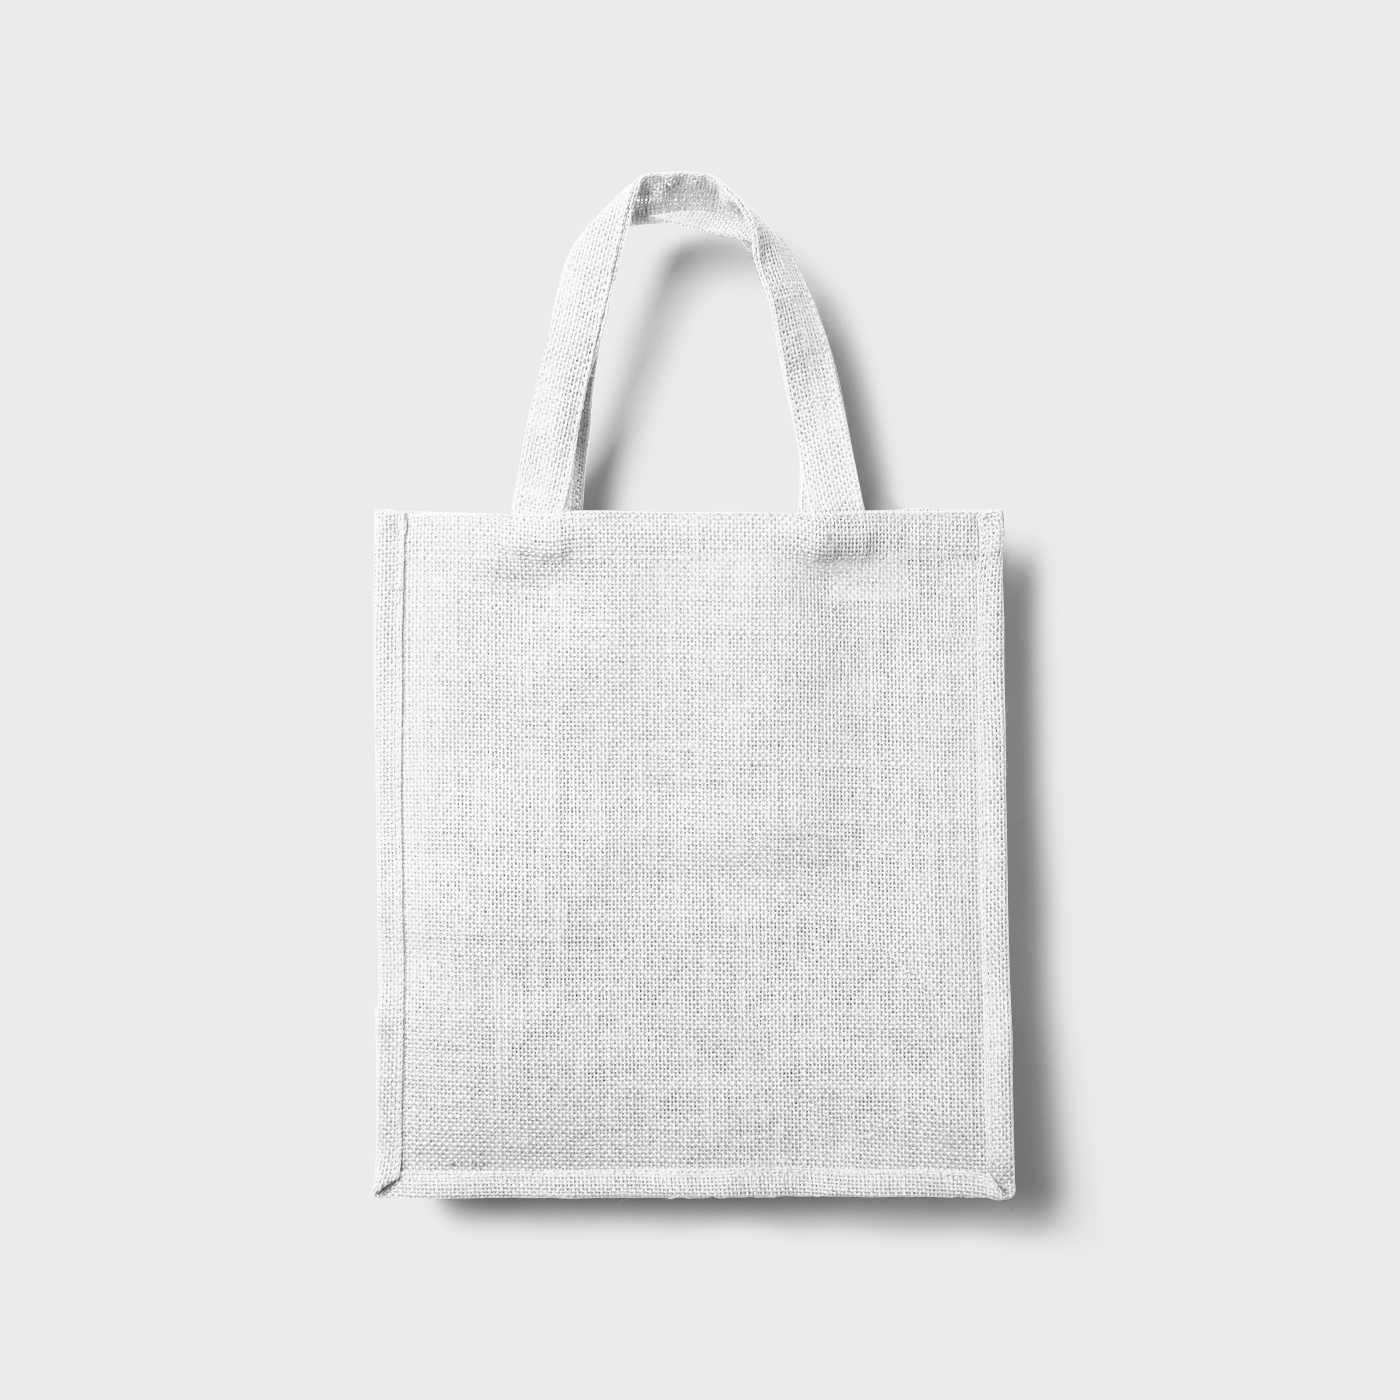 Front View of a Eco Tote Bag Mockup FREE PSD